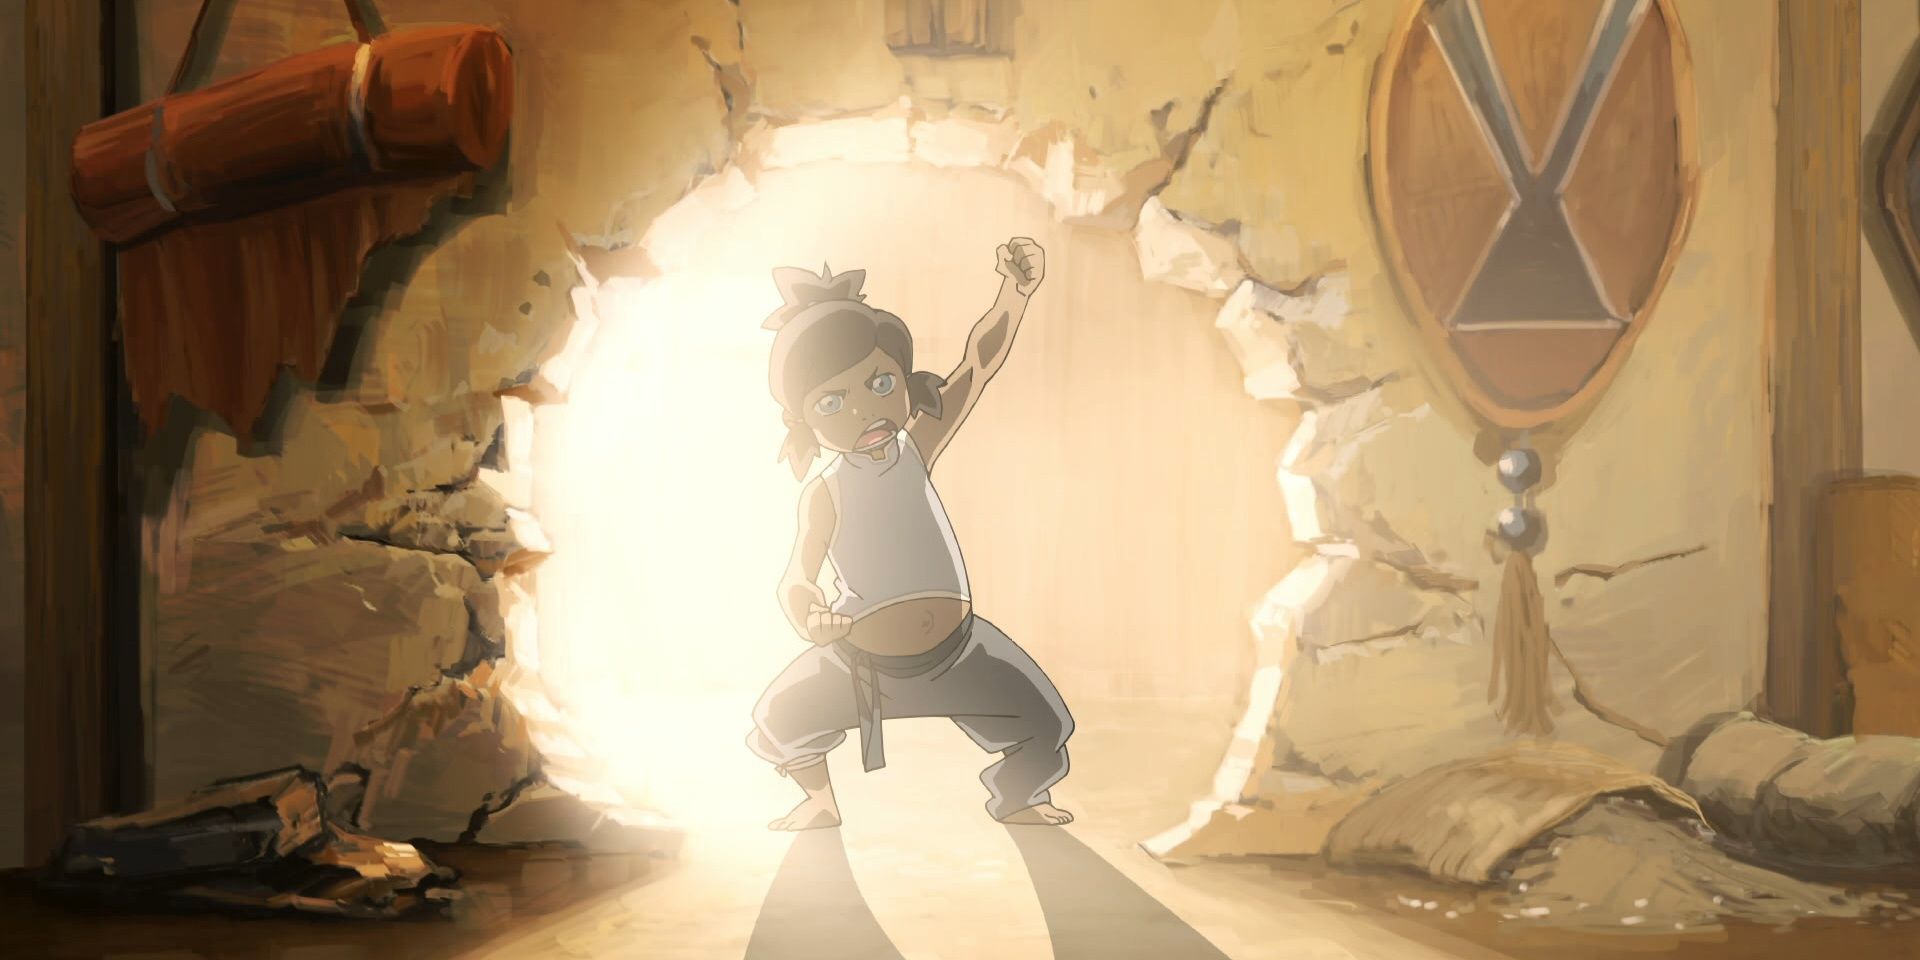 legend of korra welcome to republic city Cropped